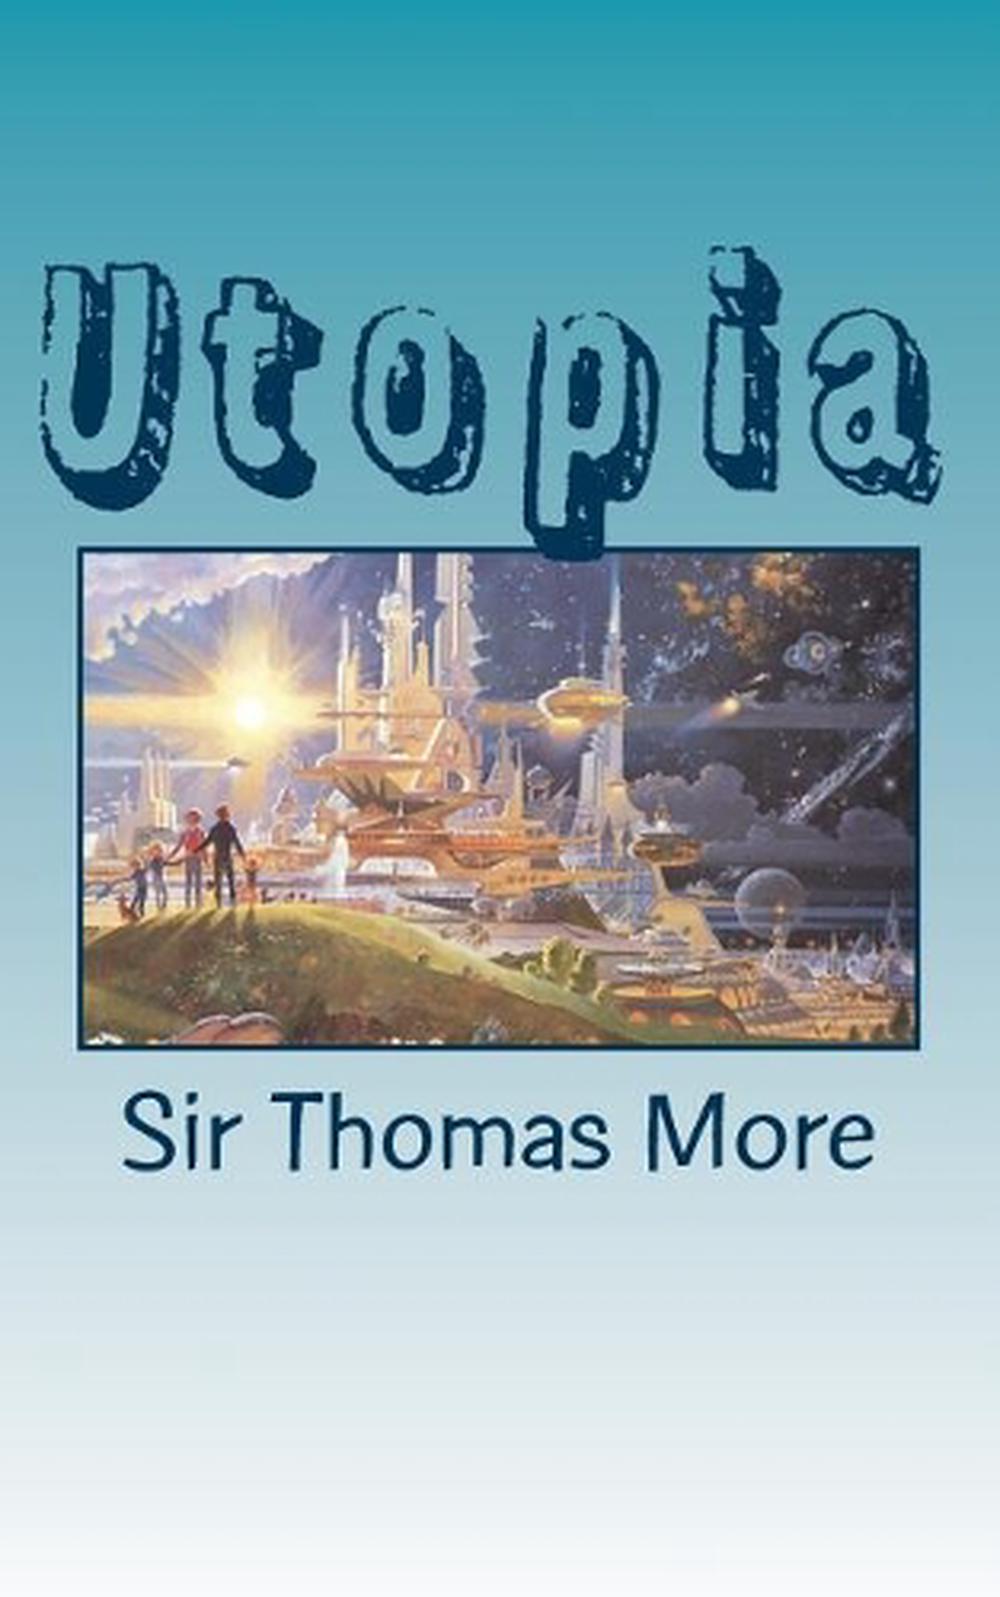 works cited for utopia thomas more